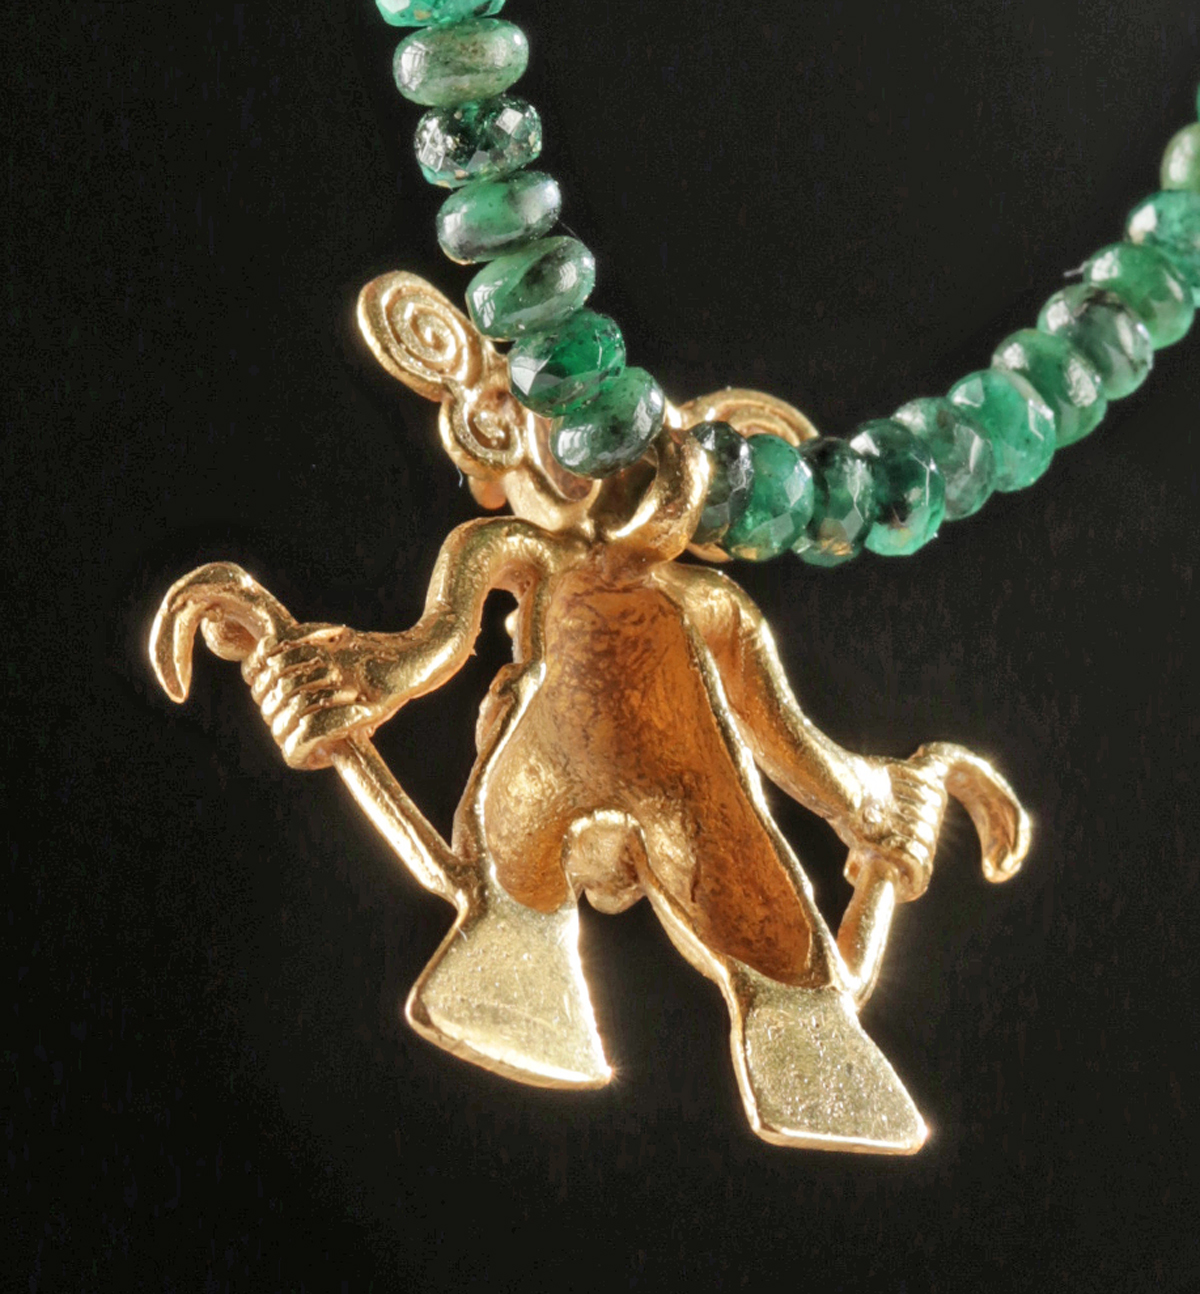 Necklace w/ Ancient Panamanian Gold Amulet & Emeralds - Image 5 of 5